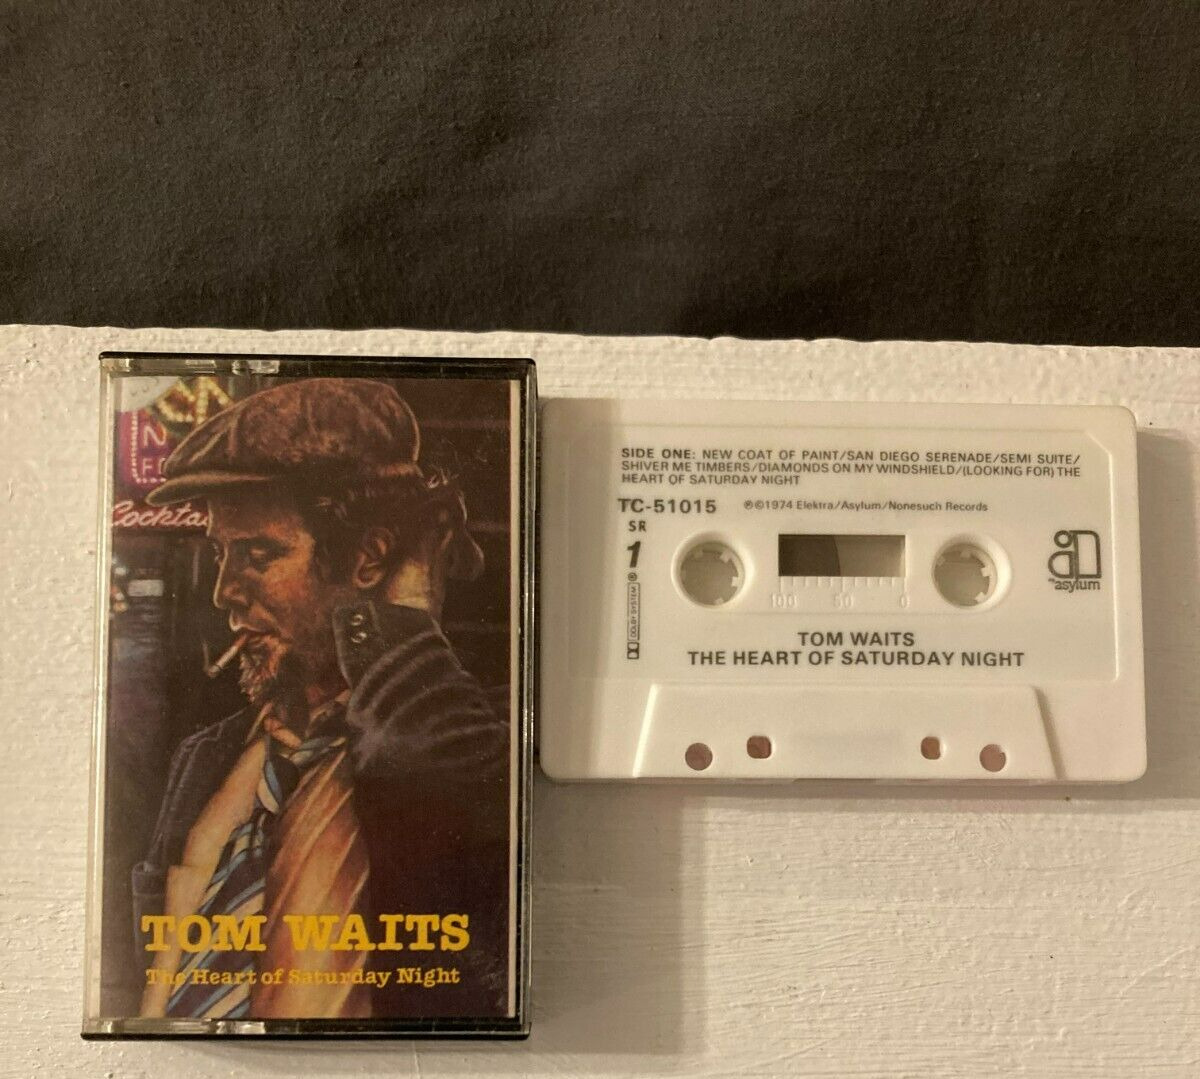 Vintage 1974 TOM WAITS “THE HEART OF SATURDAY NIGHT” CASSETTE TAPE